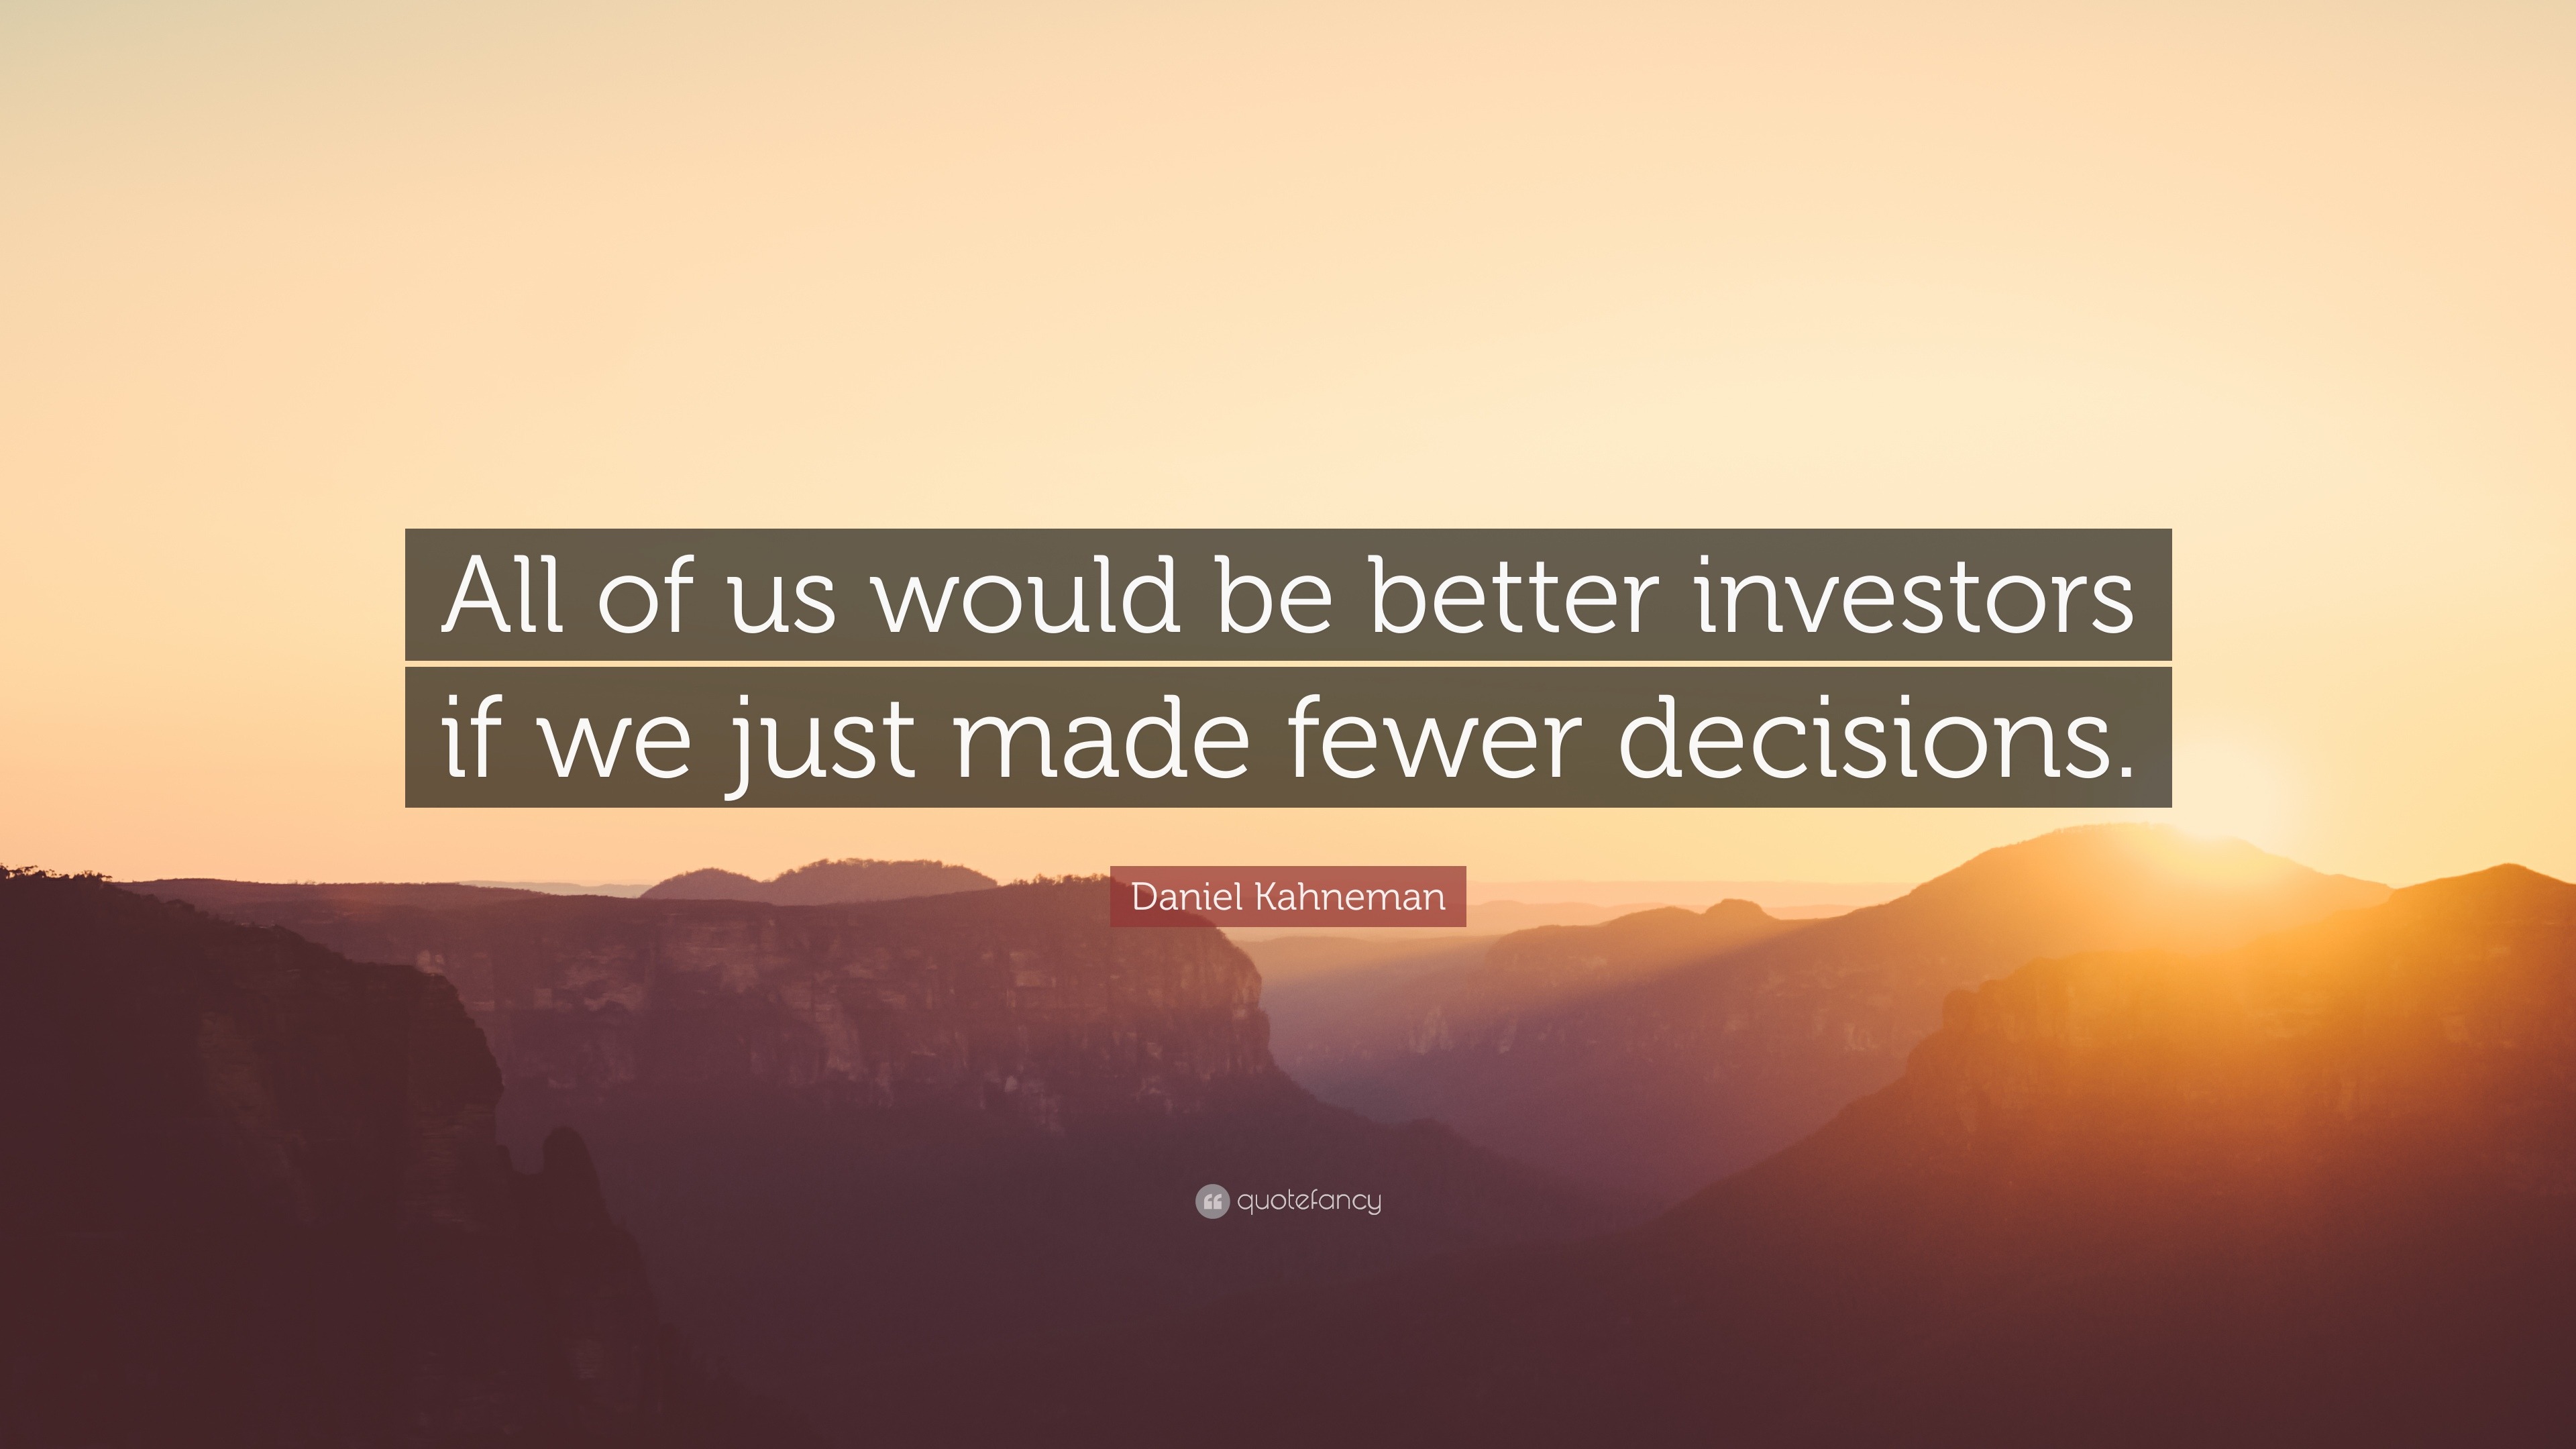 Daniel Kahneman Quote: “All of us would be better investors if we just